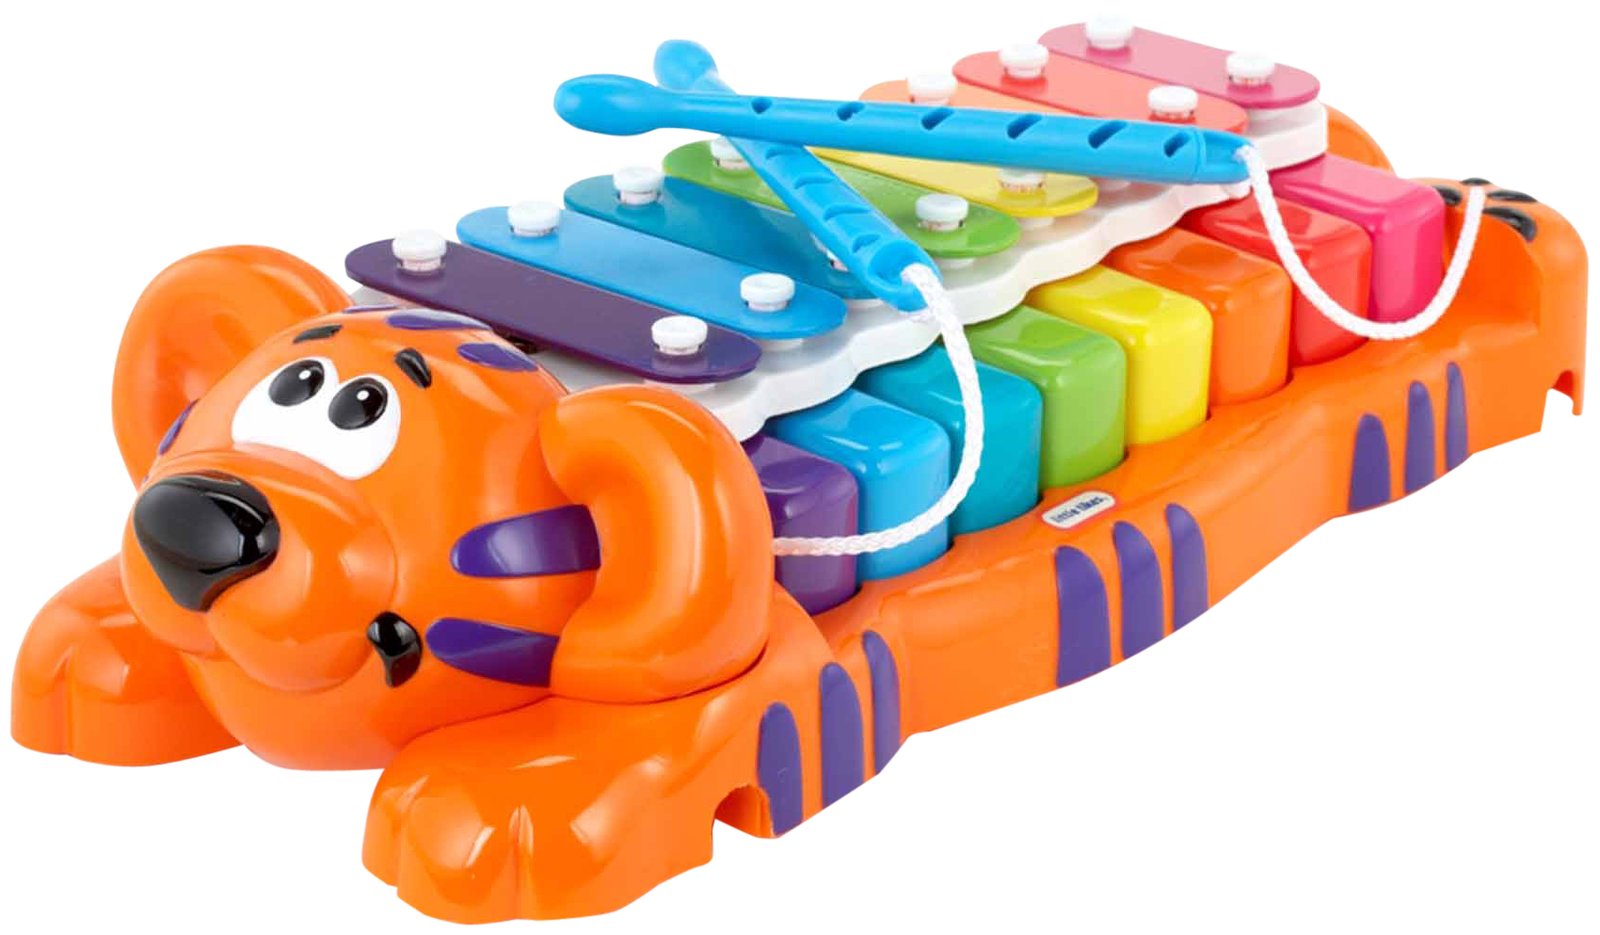 Piglet selected this xylophone as his birthday present from me